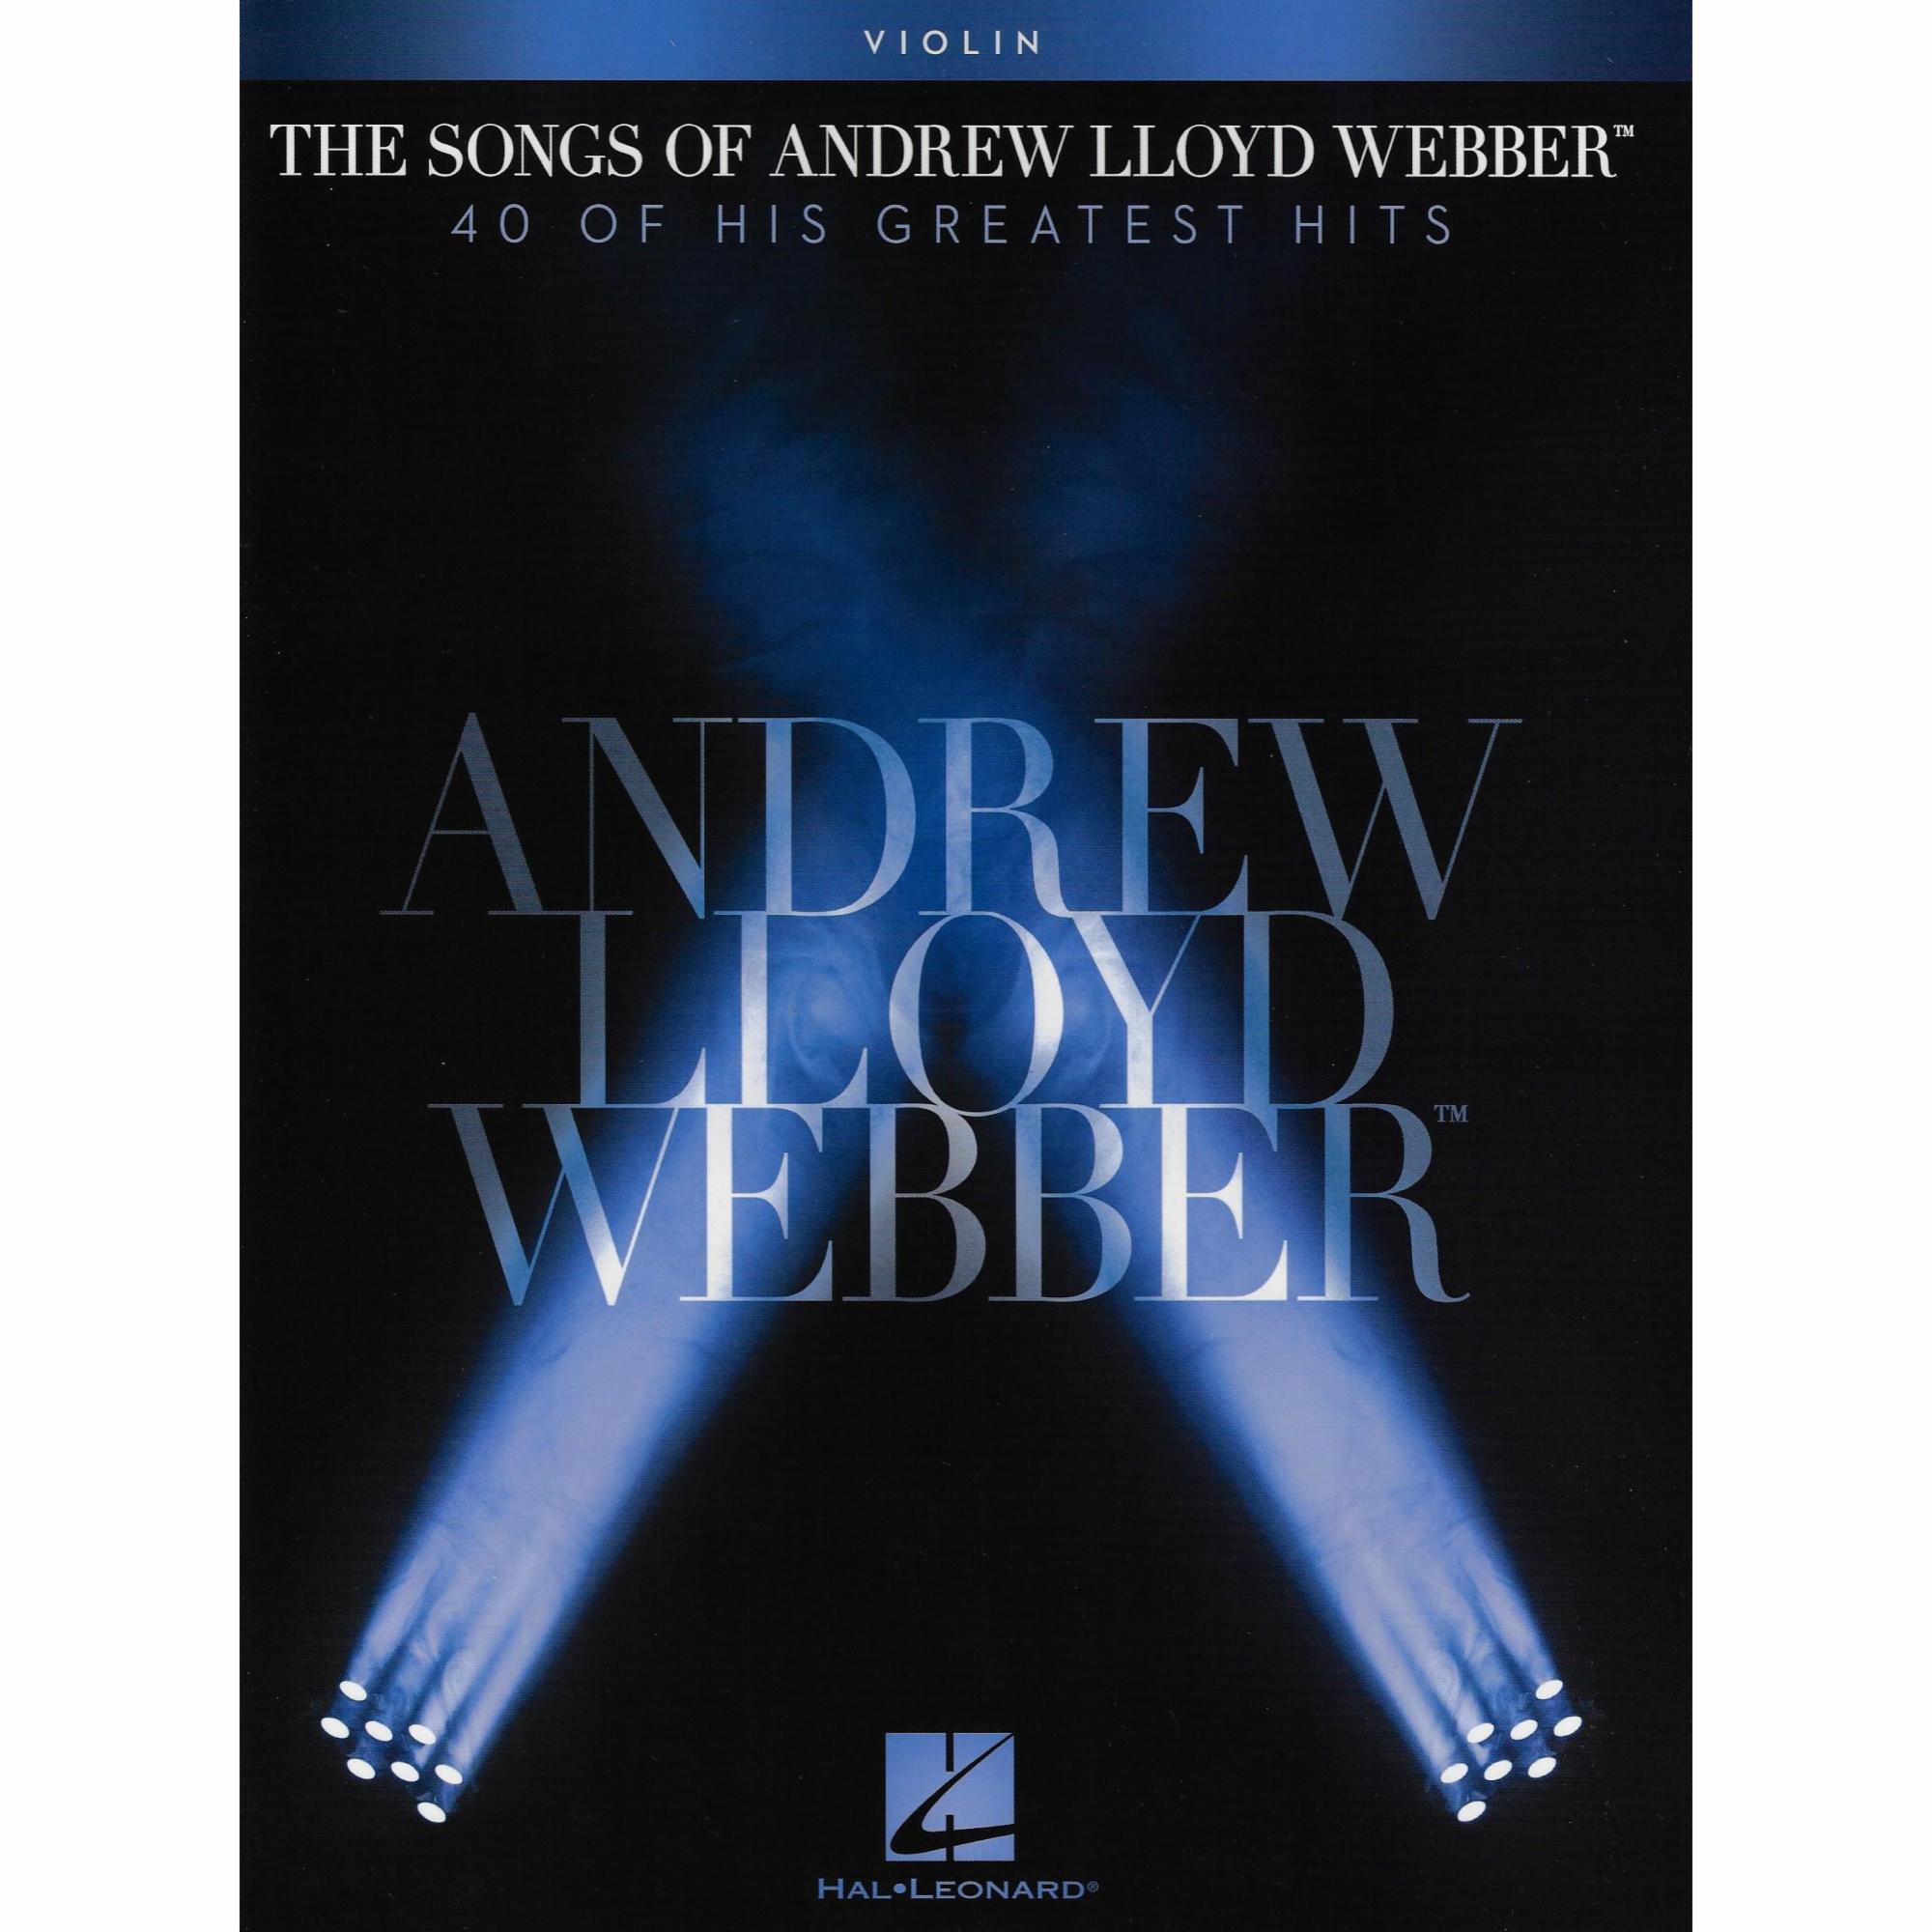 The Songs of Andrew Lloyd Webber for Violin, Viola, or Cello